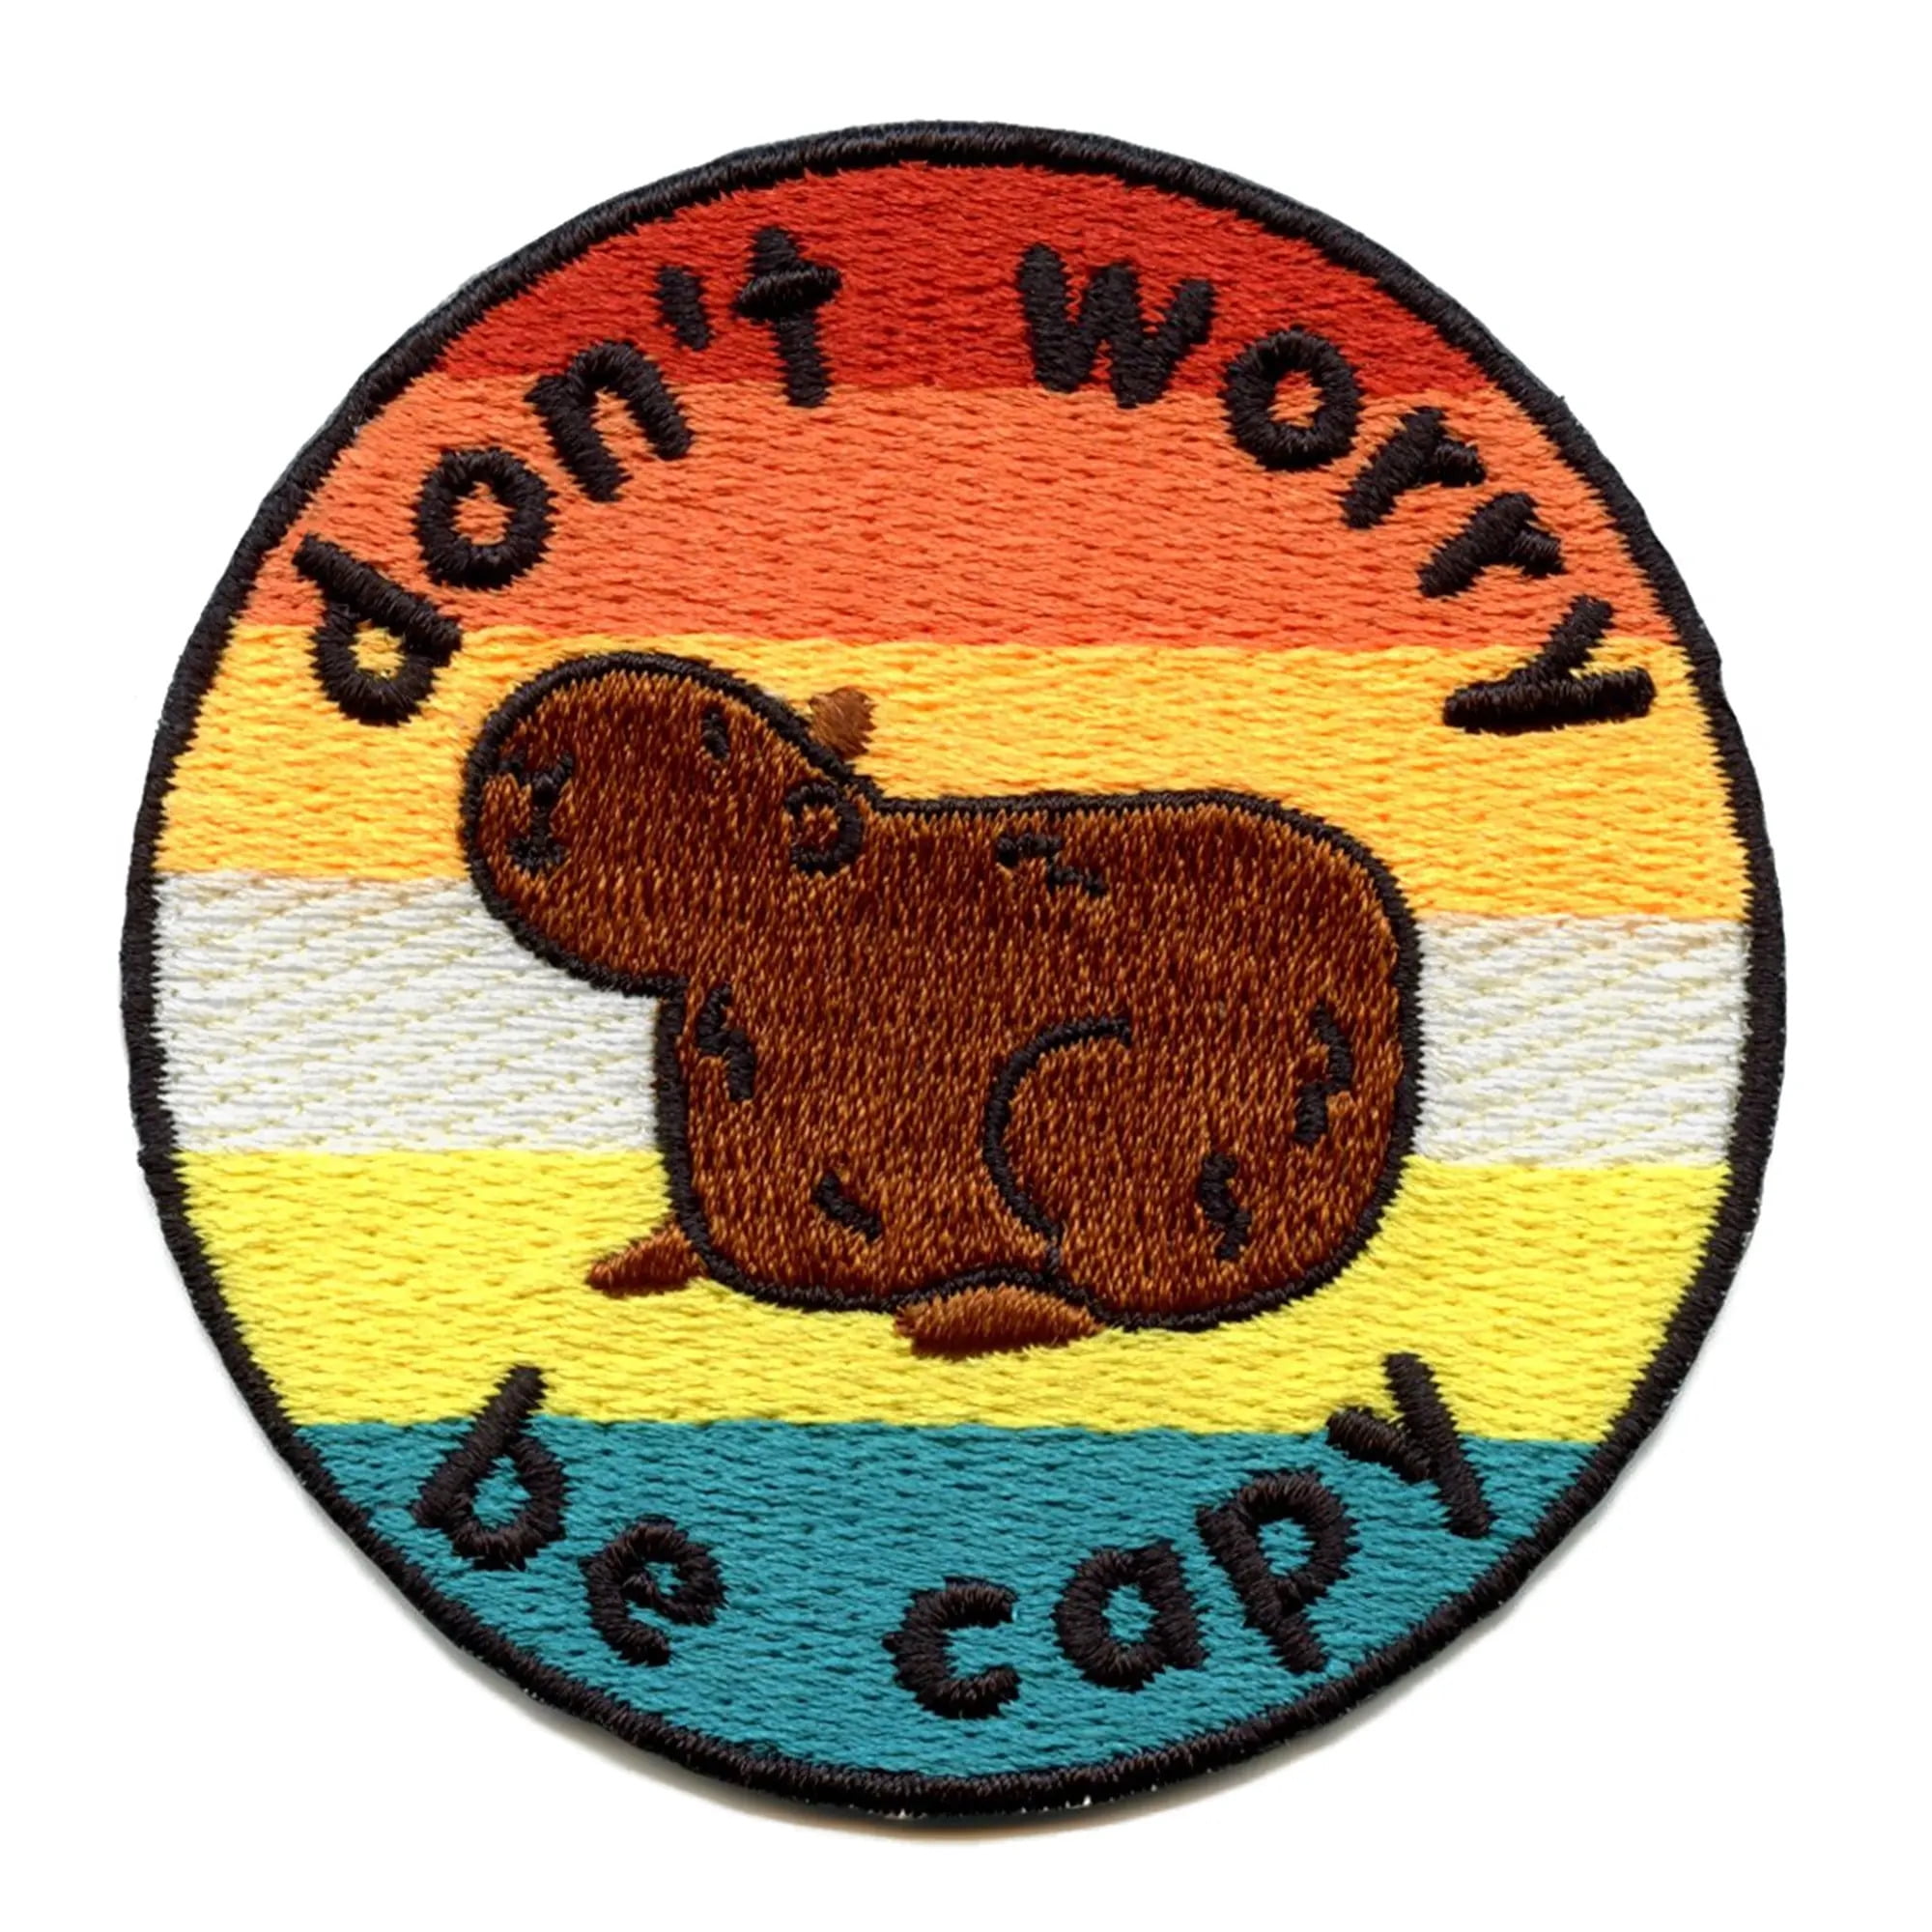 Capybara Small Iron-on Patch Iron on Patch, Iron on Patch Flower, Patch,  Patches, Patches for Jackets, Patch for Backpack, Capybara Patch 